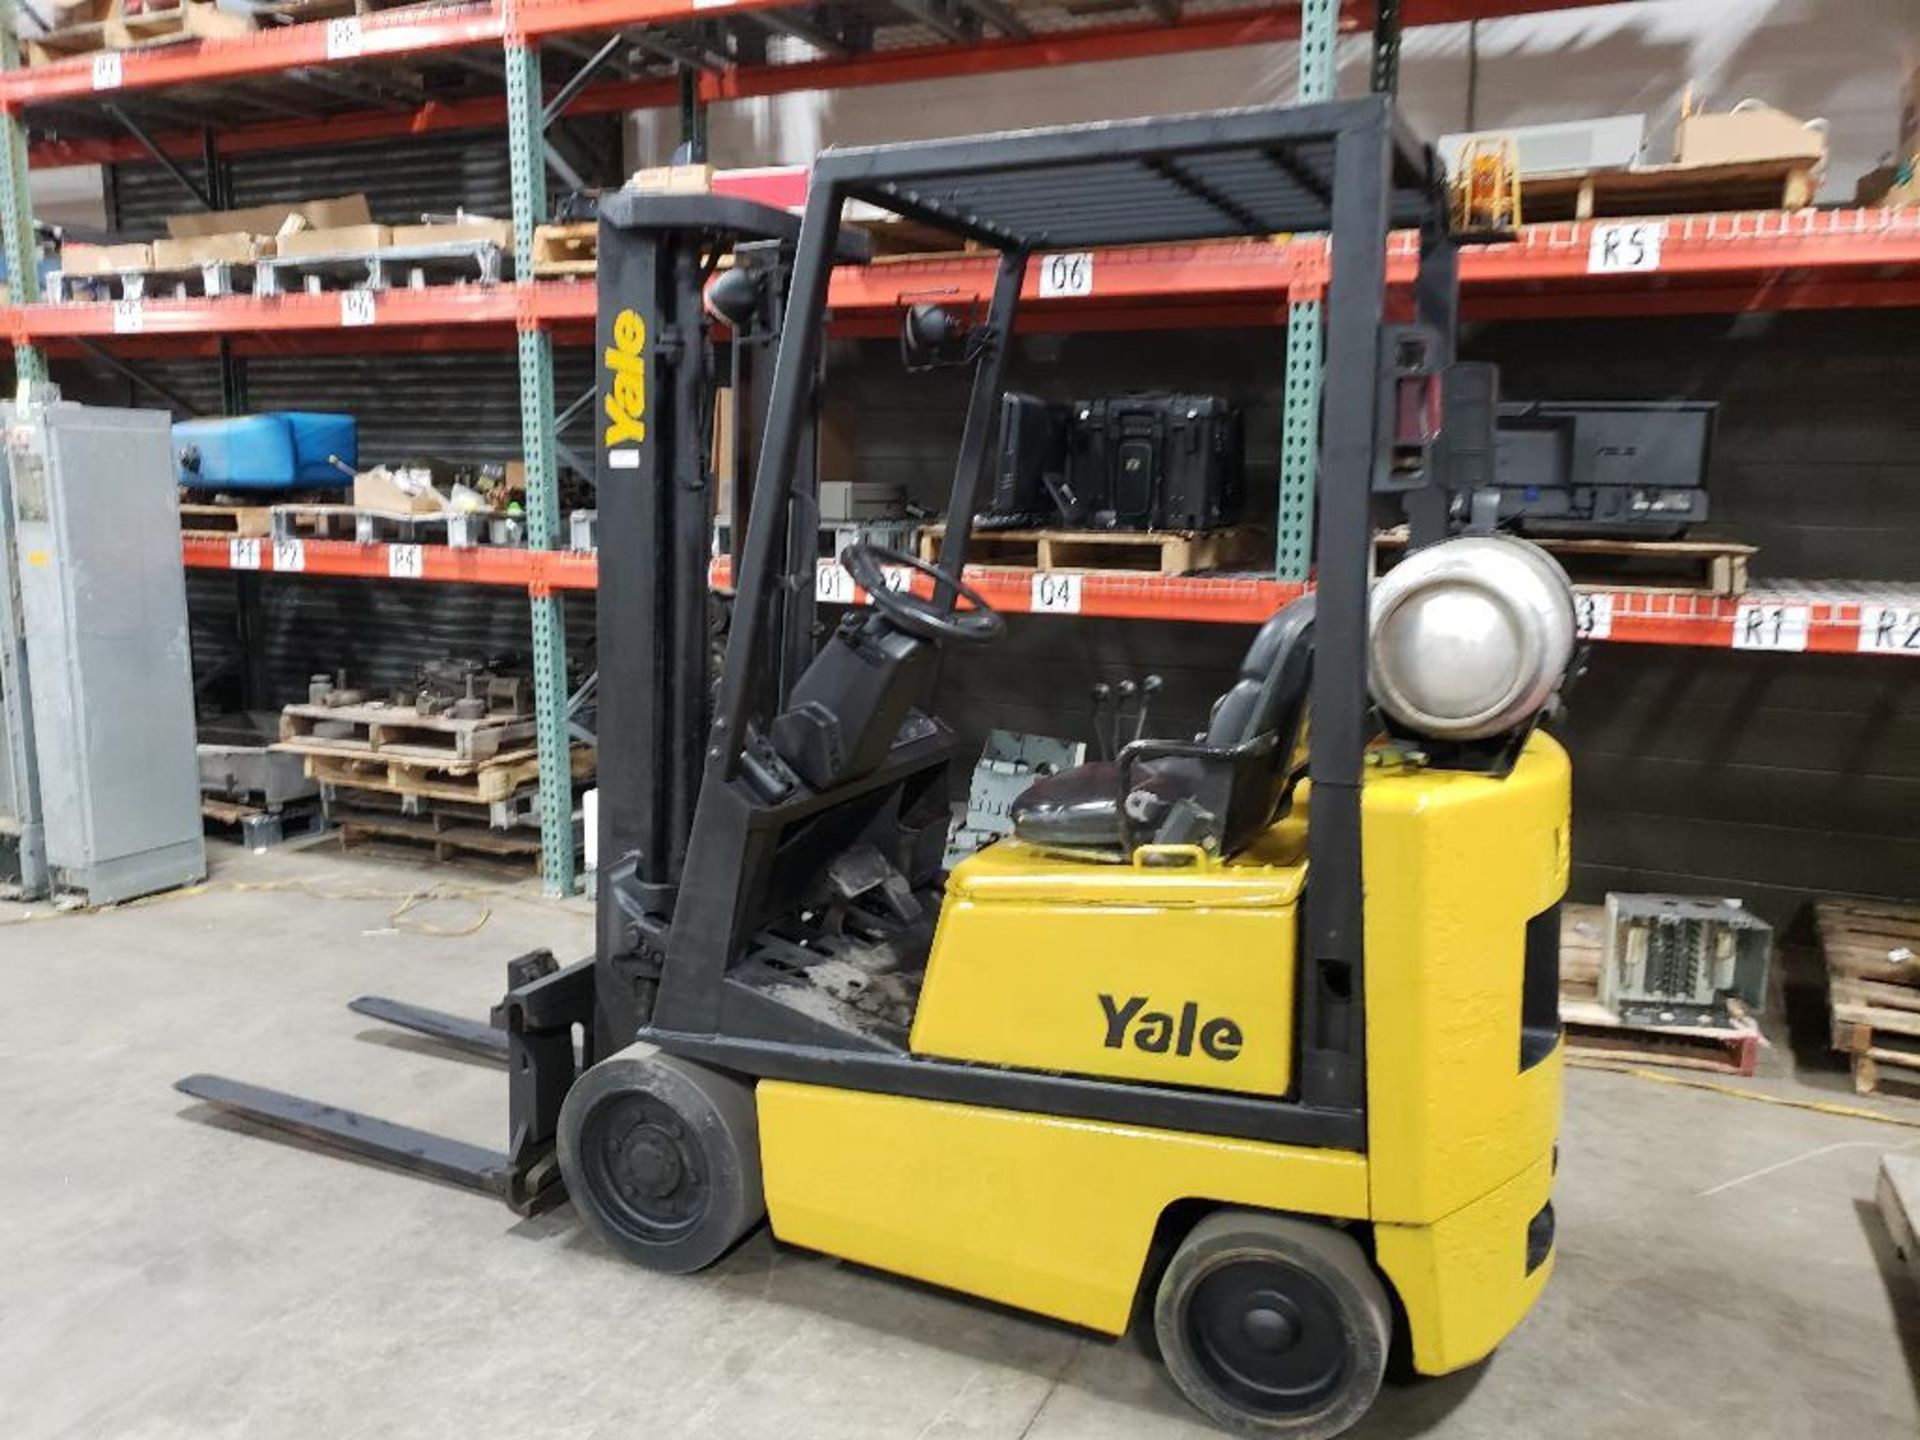 2003 Yale propane forklift. 8313 hours. 2950lb capacity. 146.7" lift. Side shift 2 stage mast.